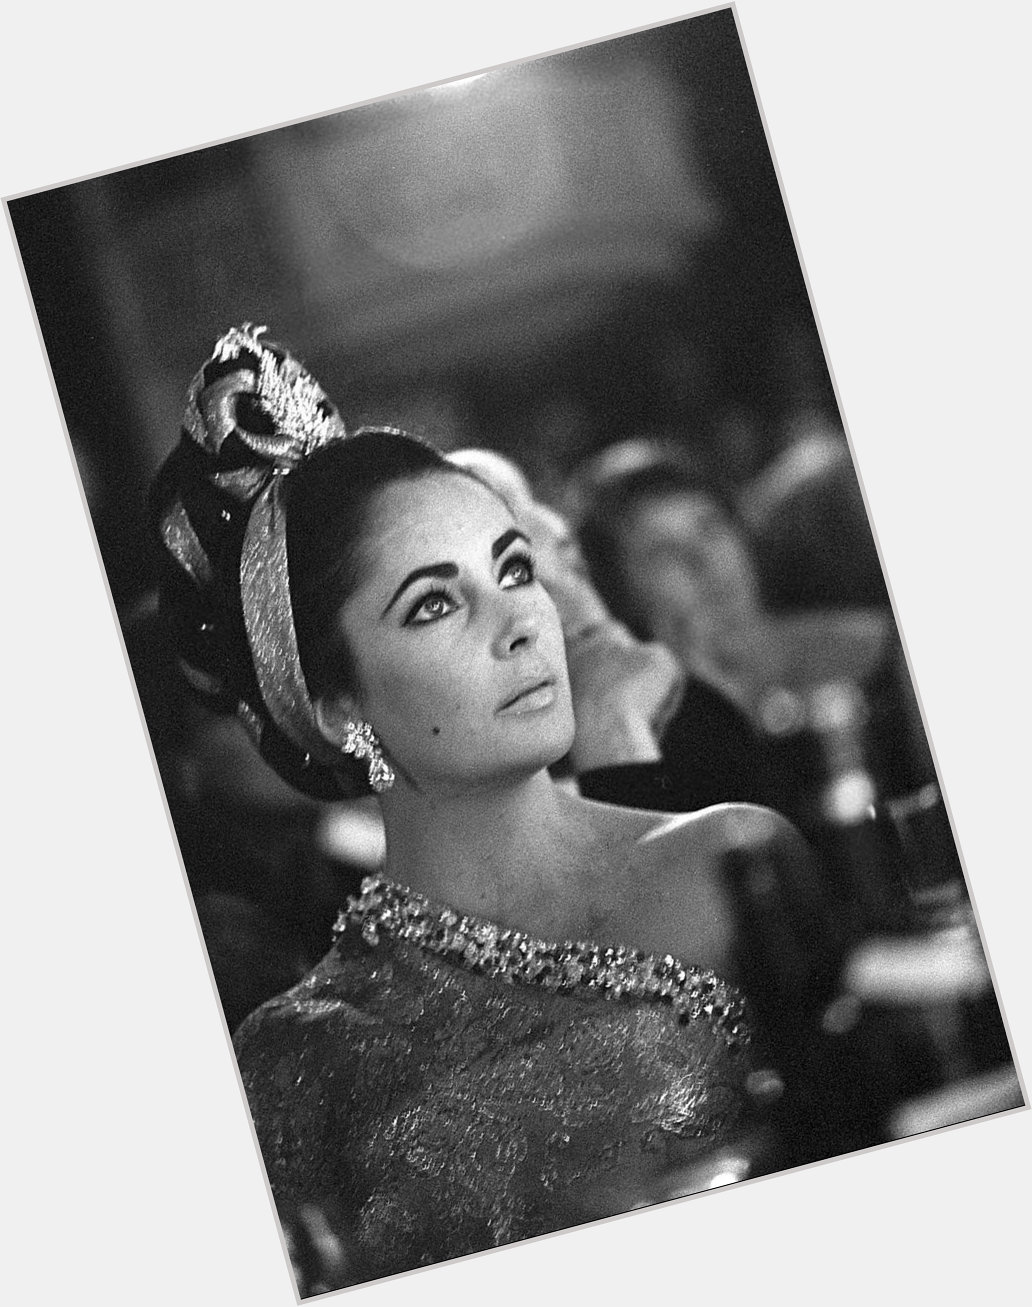 Happy heavenly birthday to THE icon and legend, Elizabeth Taylor 